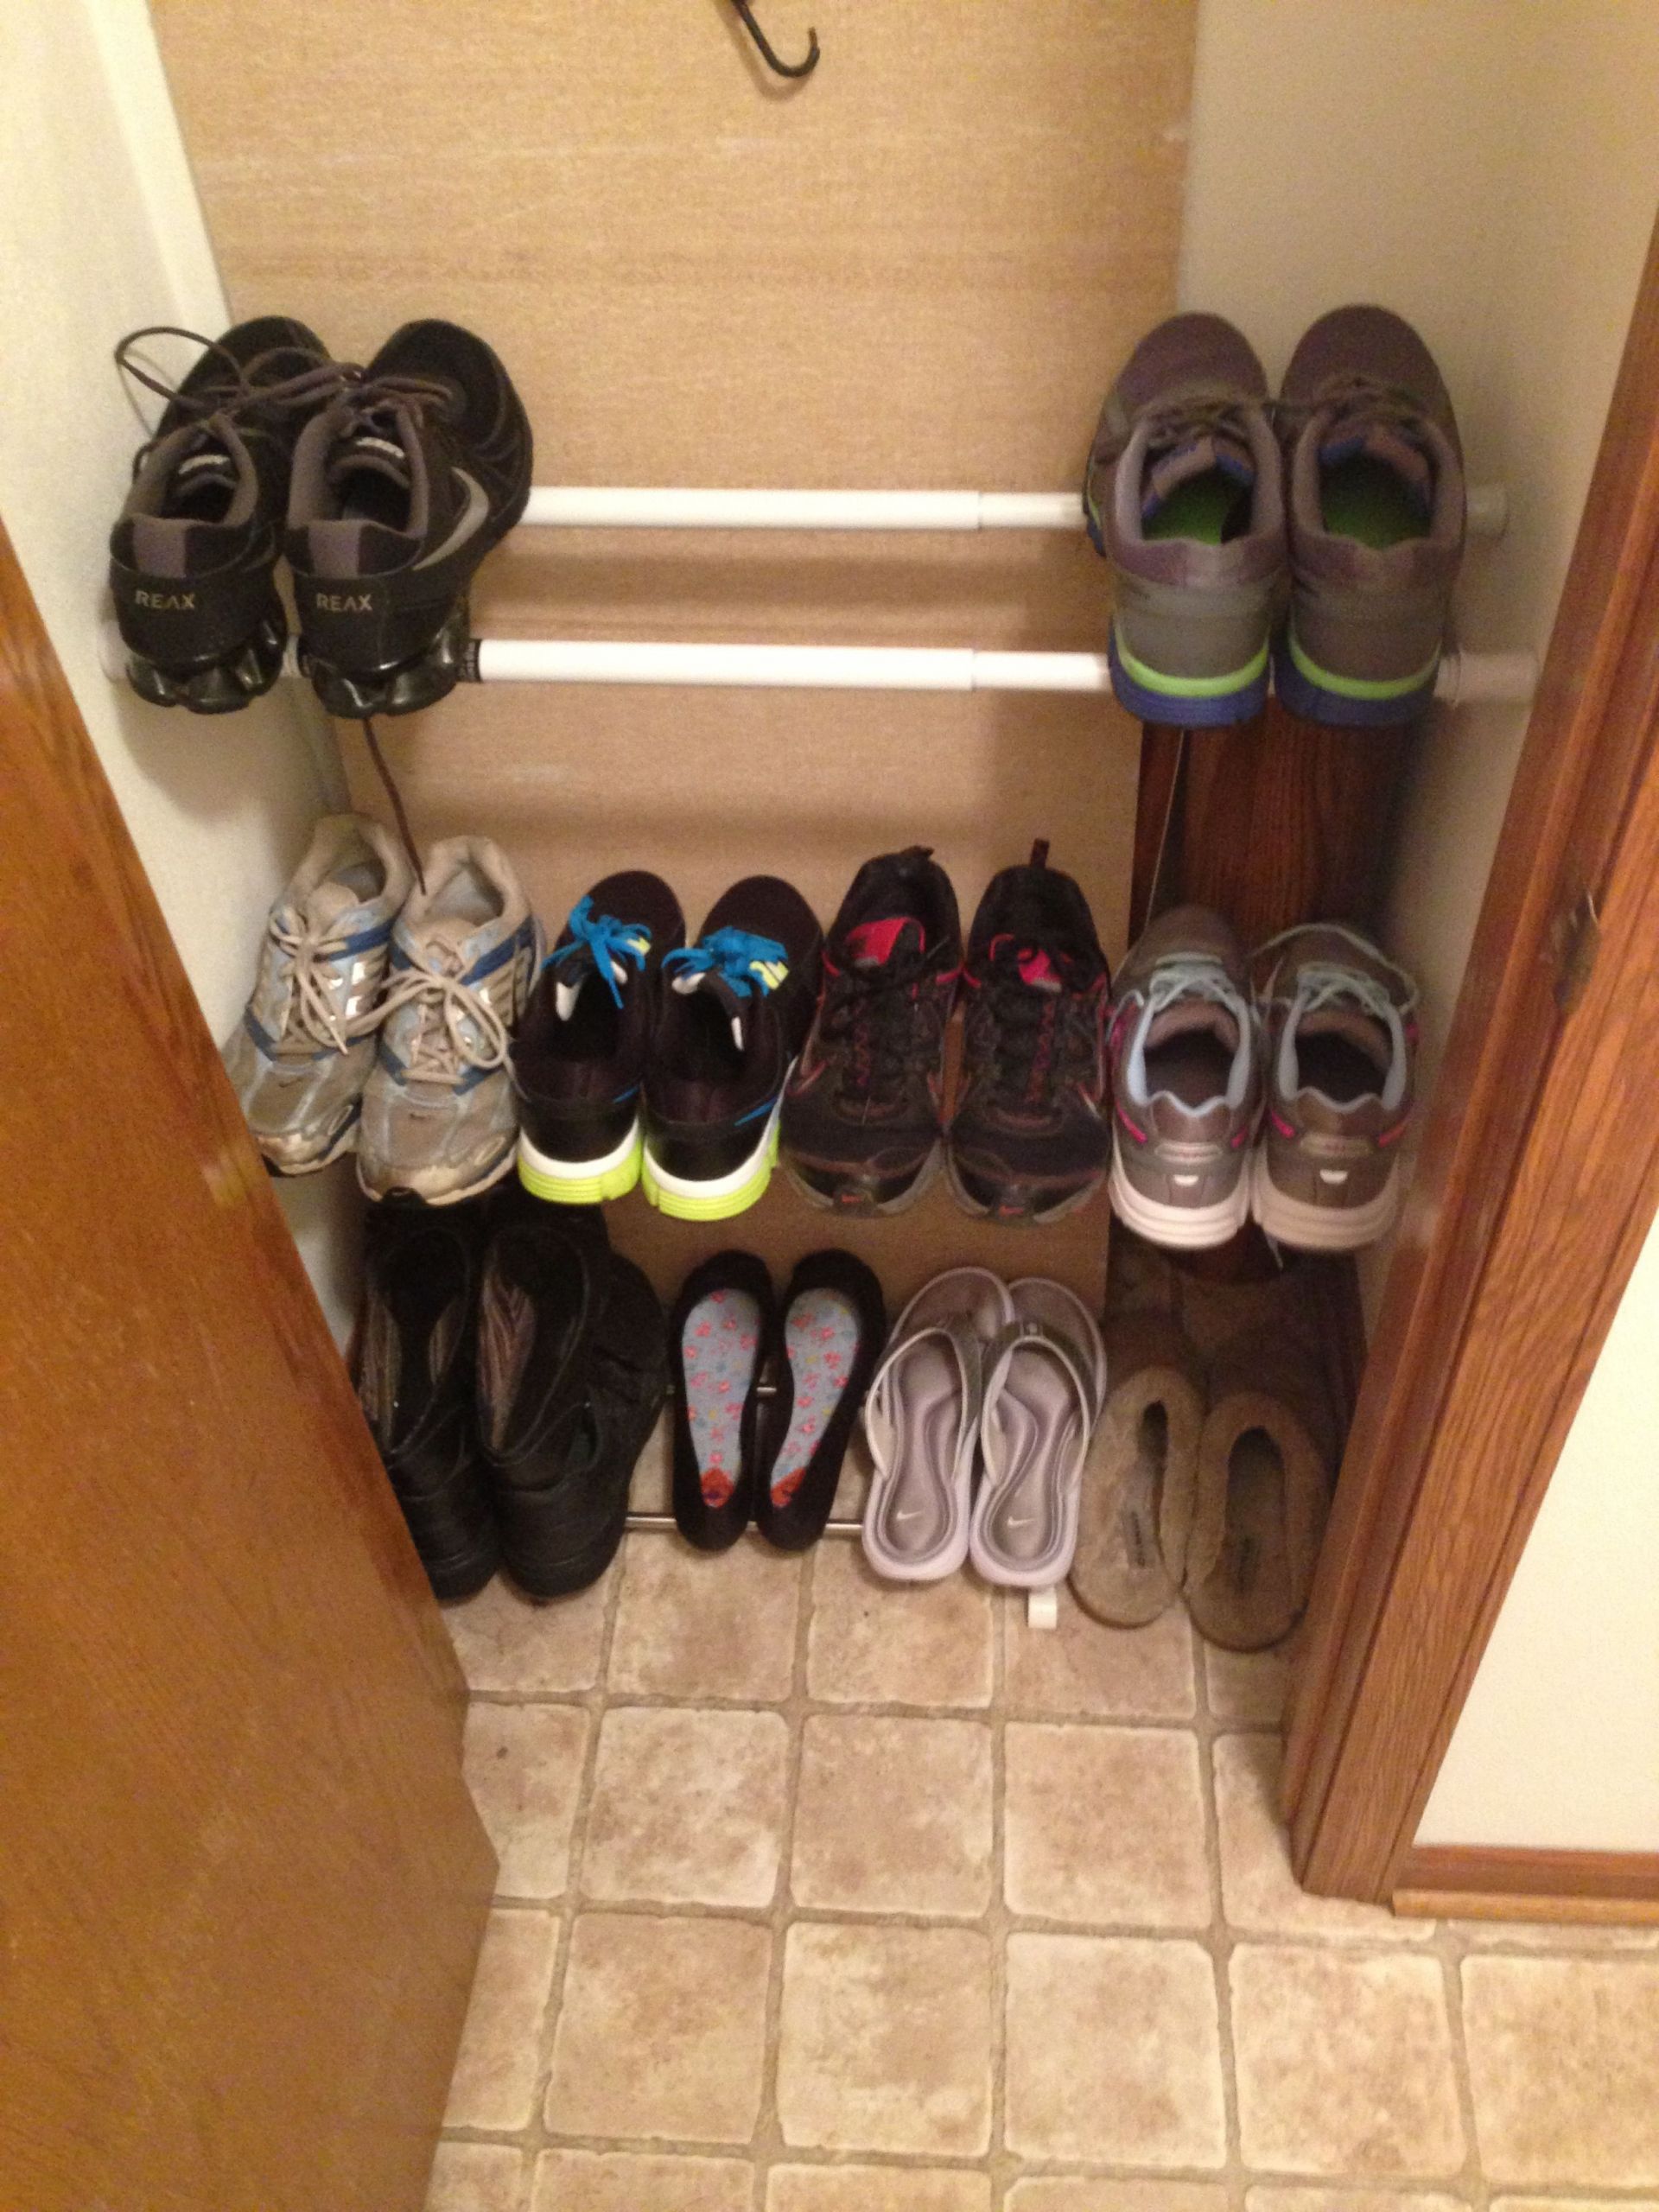 DIY Shoe Rack For Small Closet
 Tension rods as a shoe rack Works amazing in 2019